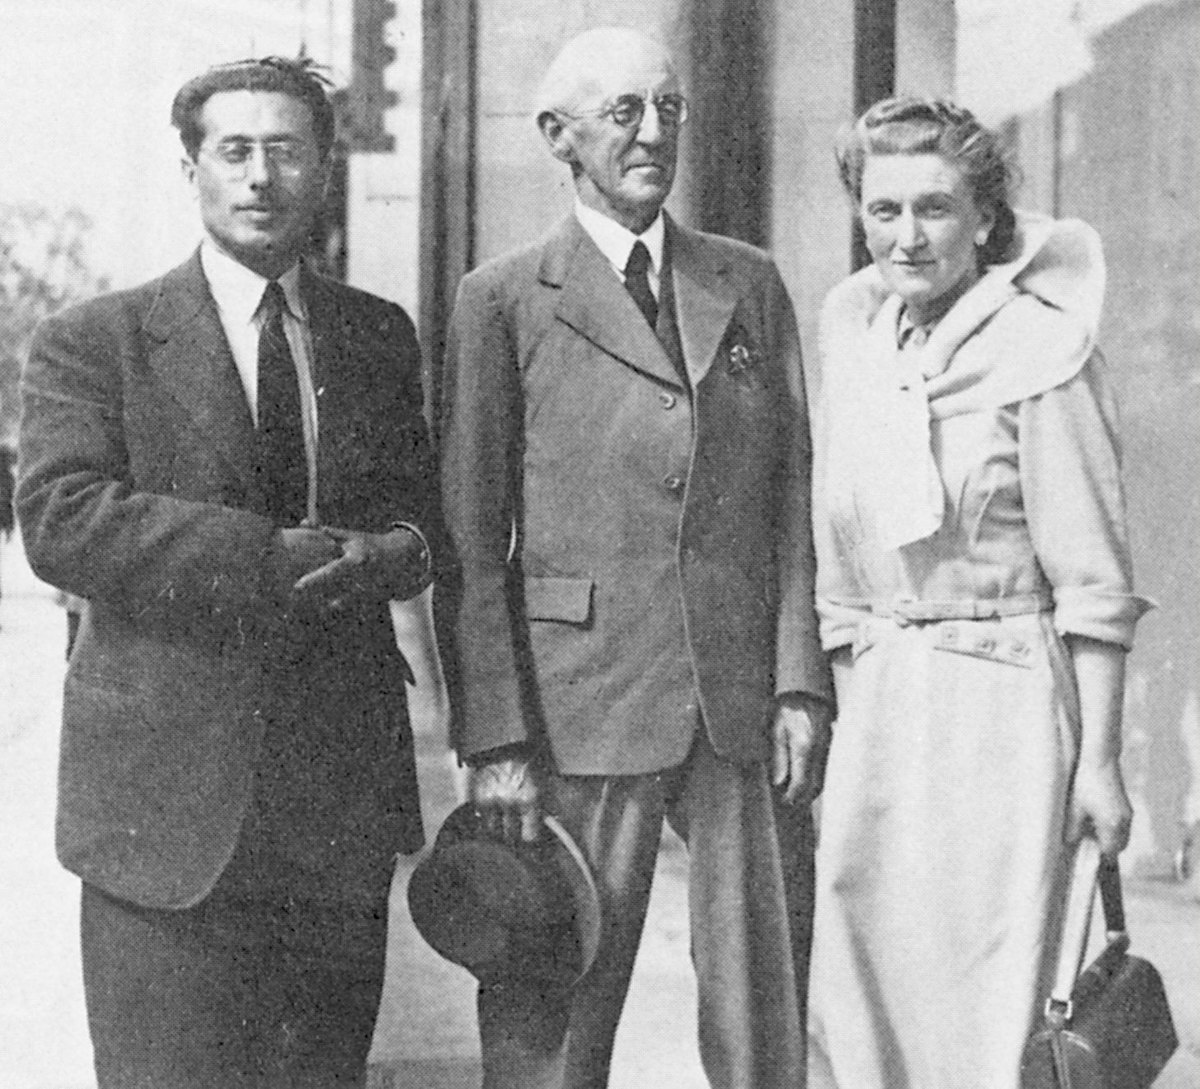 Ursula Newman (later Mrs. Samandari) in Dublin in 1950 with her future husband Dr. Mihdi Samandari (left) and George Townshend. (Photo: by permission of George Ronald, Publisher)